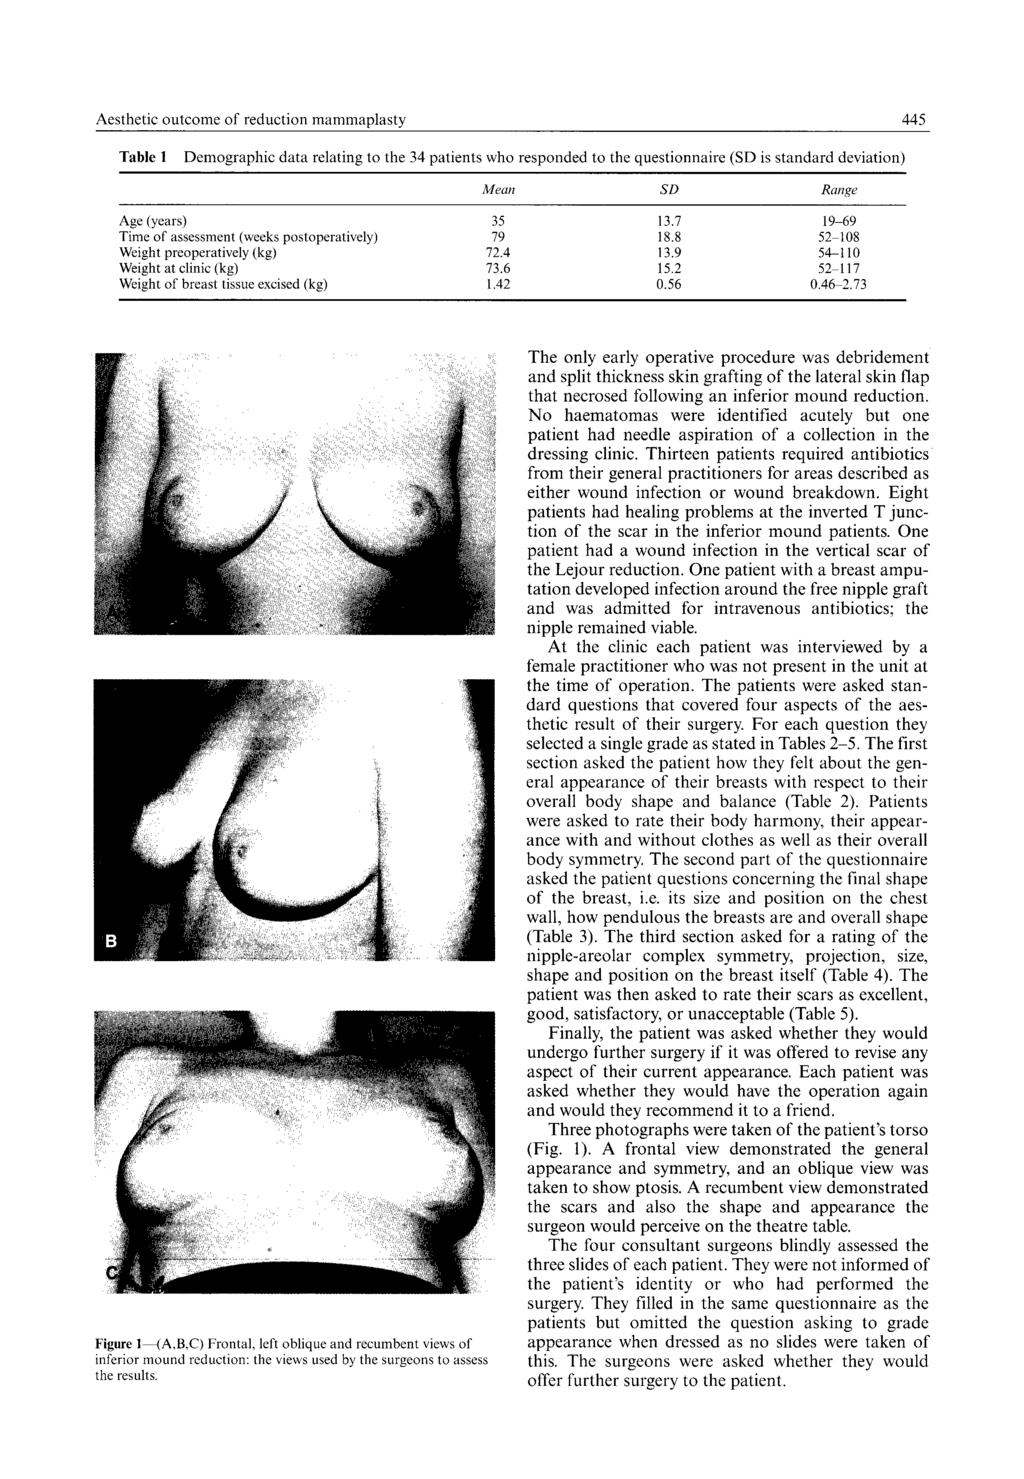 Aesthetic outcome of reduction mammaplasty 445 Table 1 Demographic data relating to the 34 patients who responded to the questionnaire (SD is standard deviation) Mean SD Range Age (years) Time of